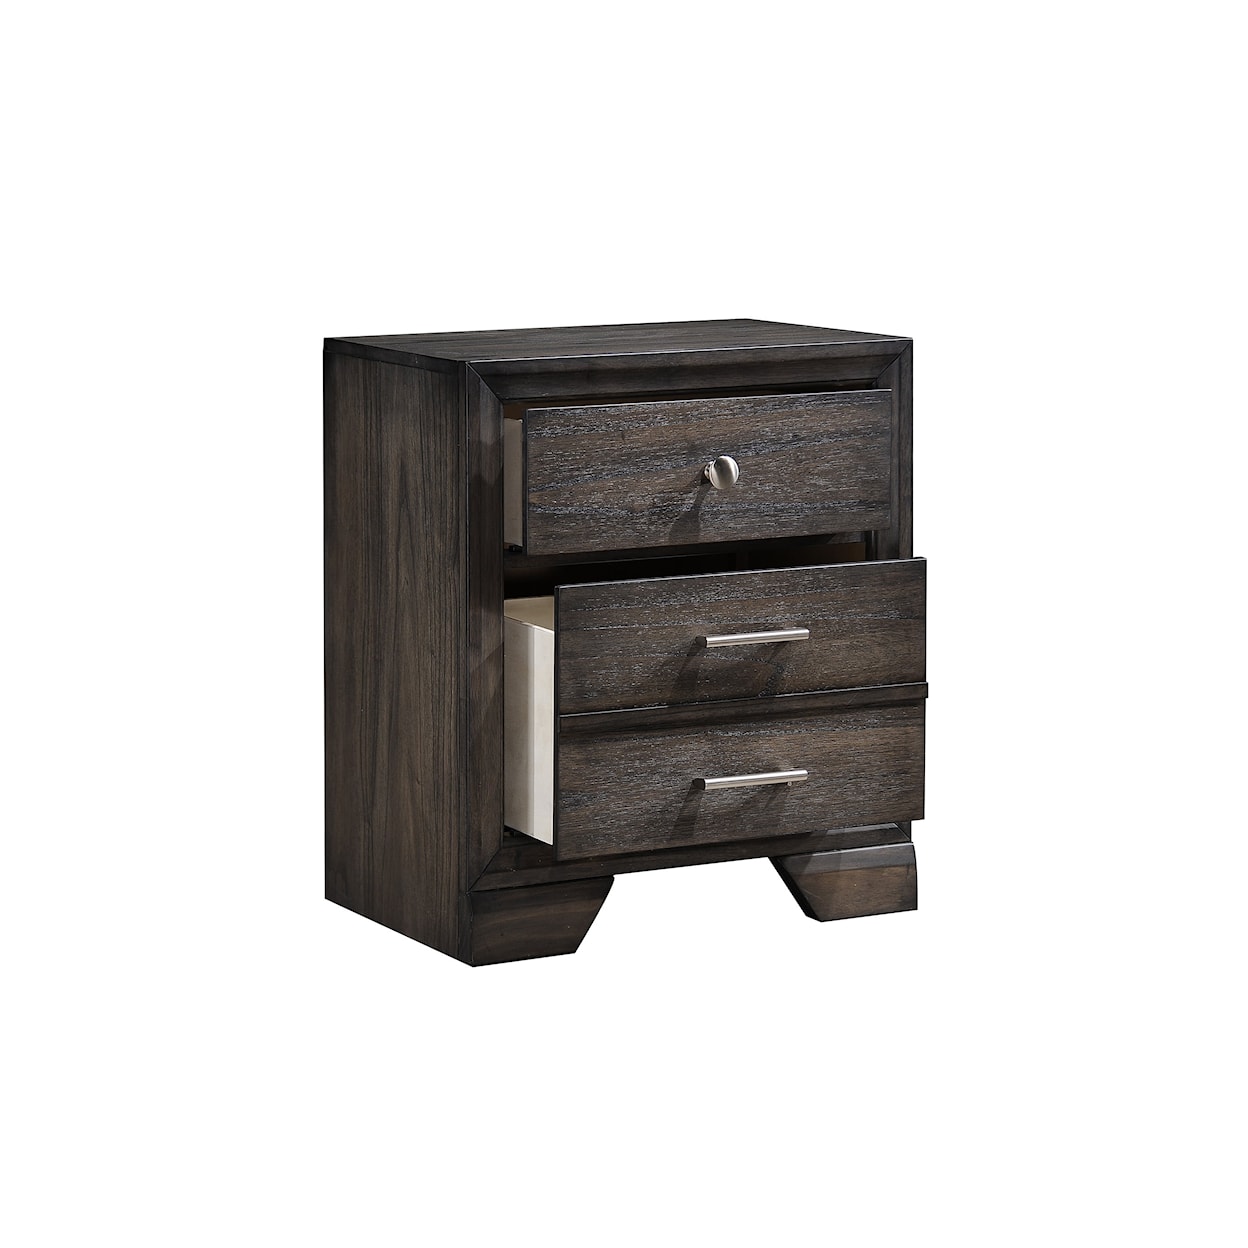 CM Jaymes Jaymes Night Stand